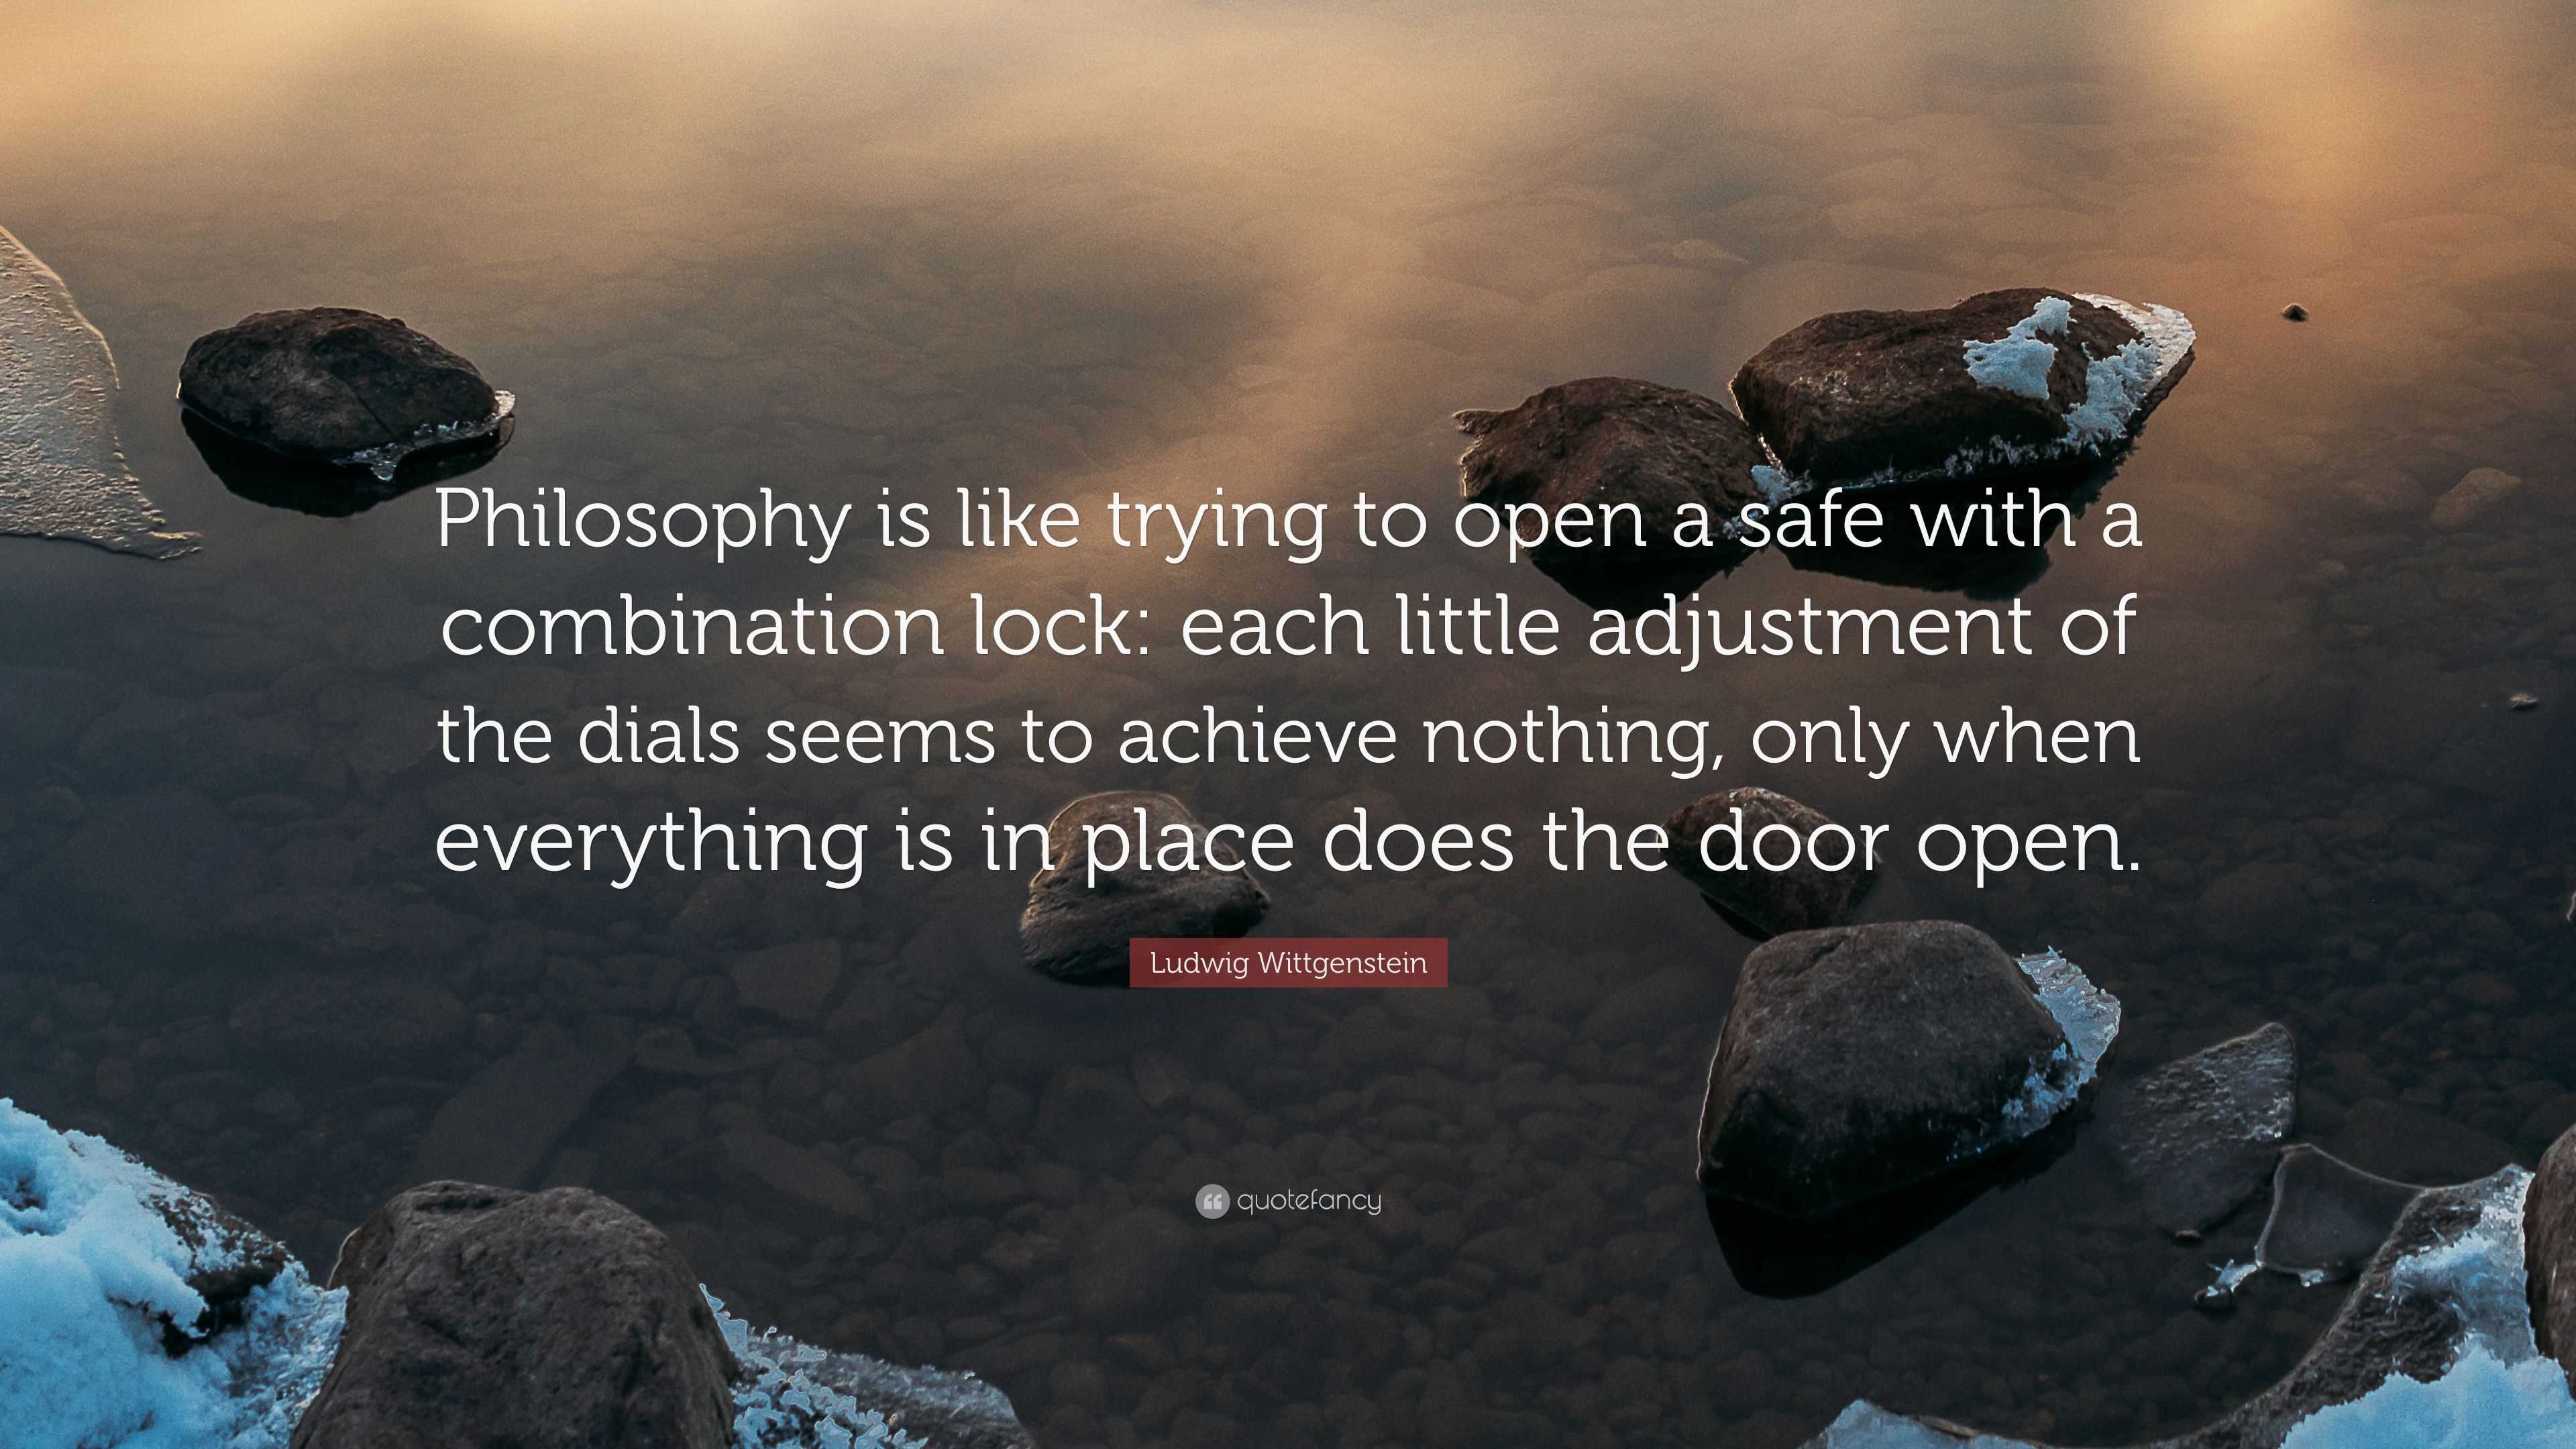 Ludwig Wittgenstein quote: Philosophy is like trying to open a